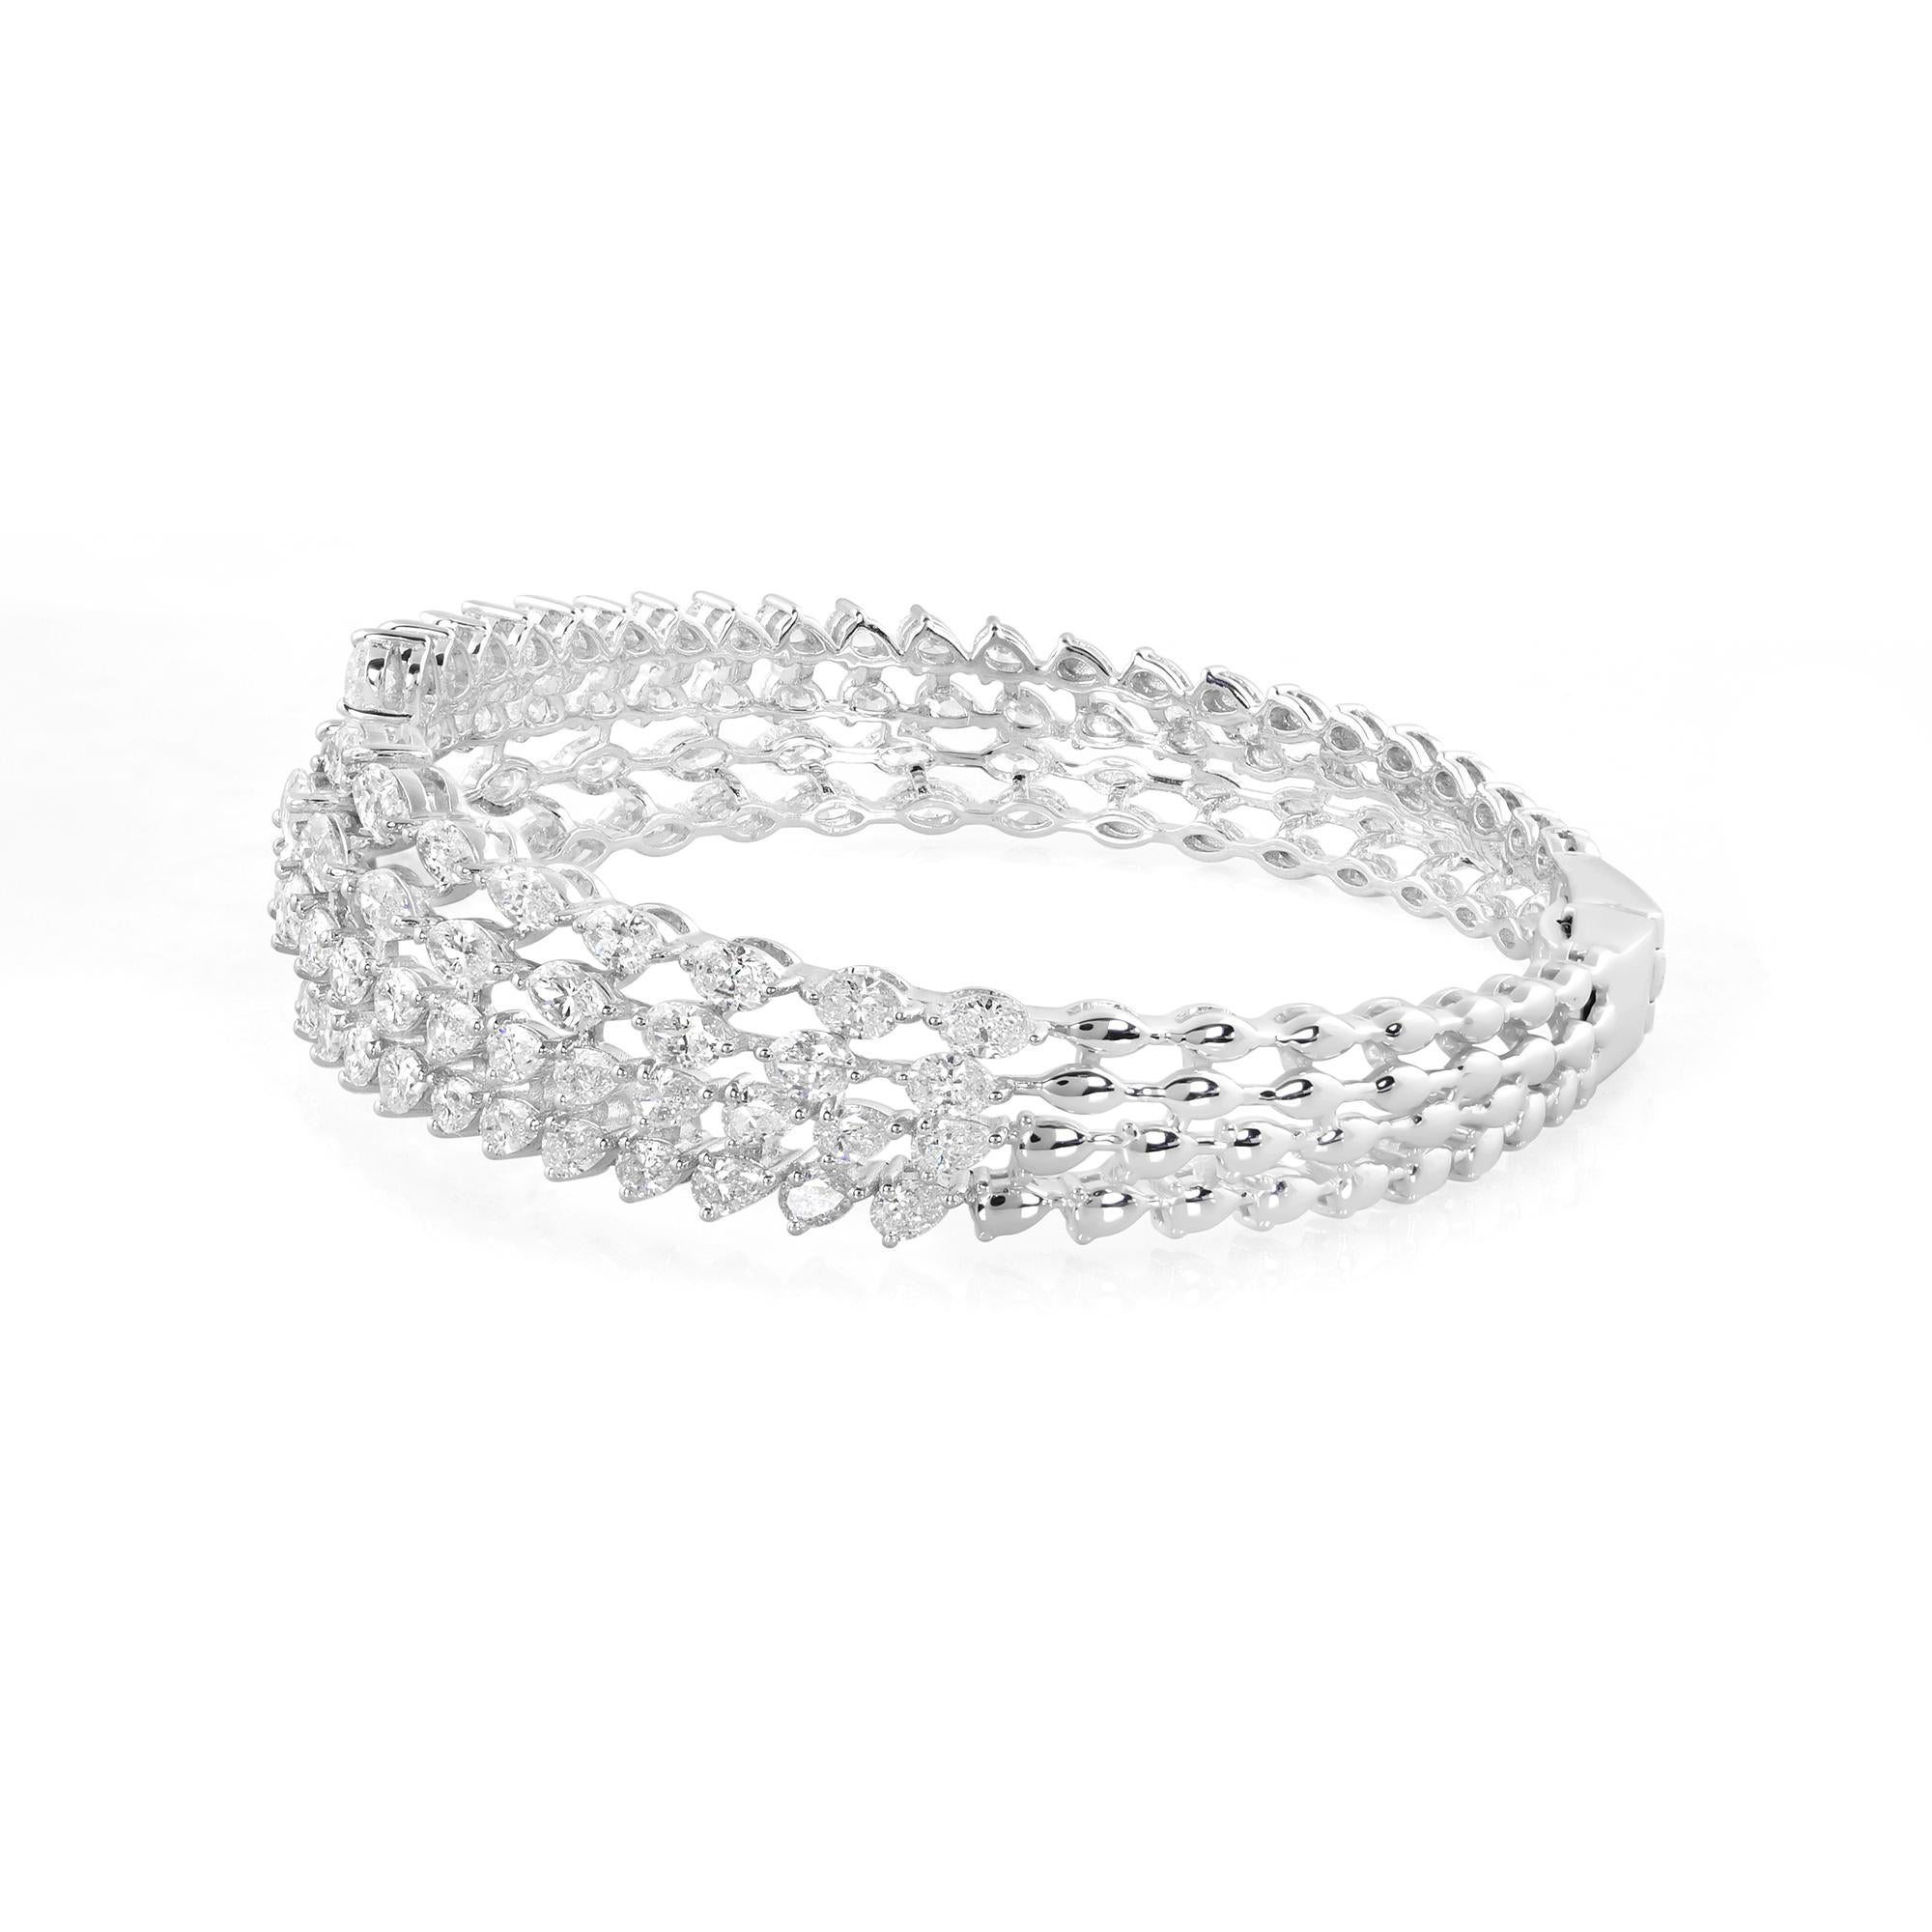 Adorn your wrist with the epitome of opulence and sophistication with this breathtaking Natural 7.1 Carat Pear Marquise Diamond Cuff Bangle Bracelet, meticulously crafted in lavish 18 karat white gold. This exquisite piece of jewelry embodies